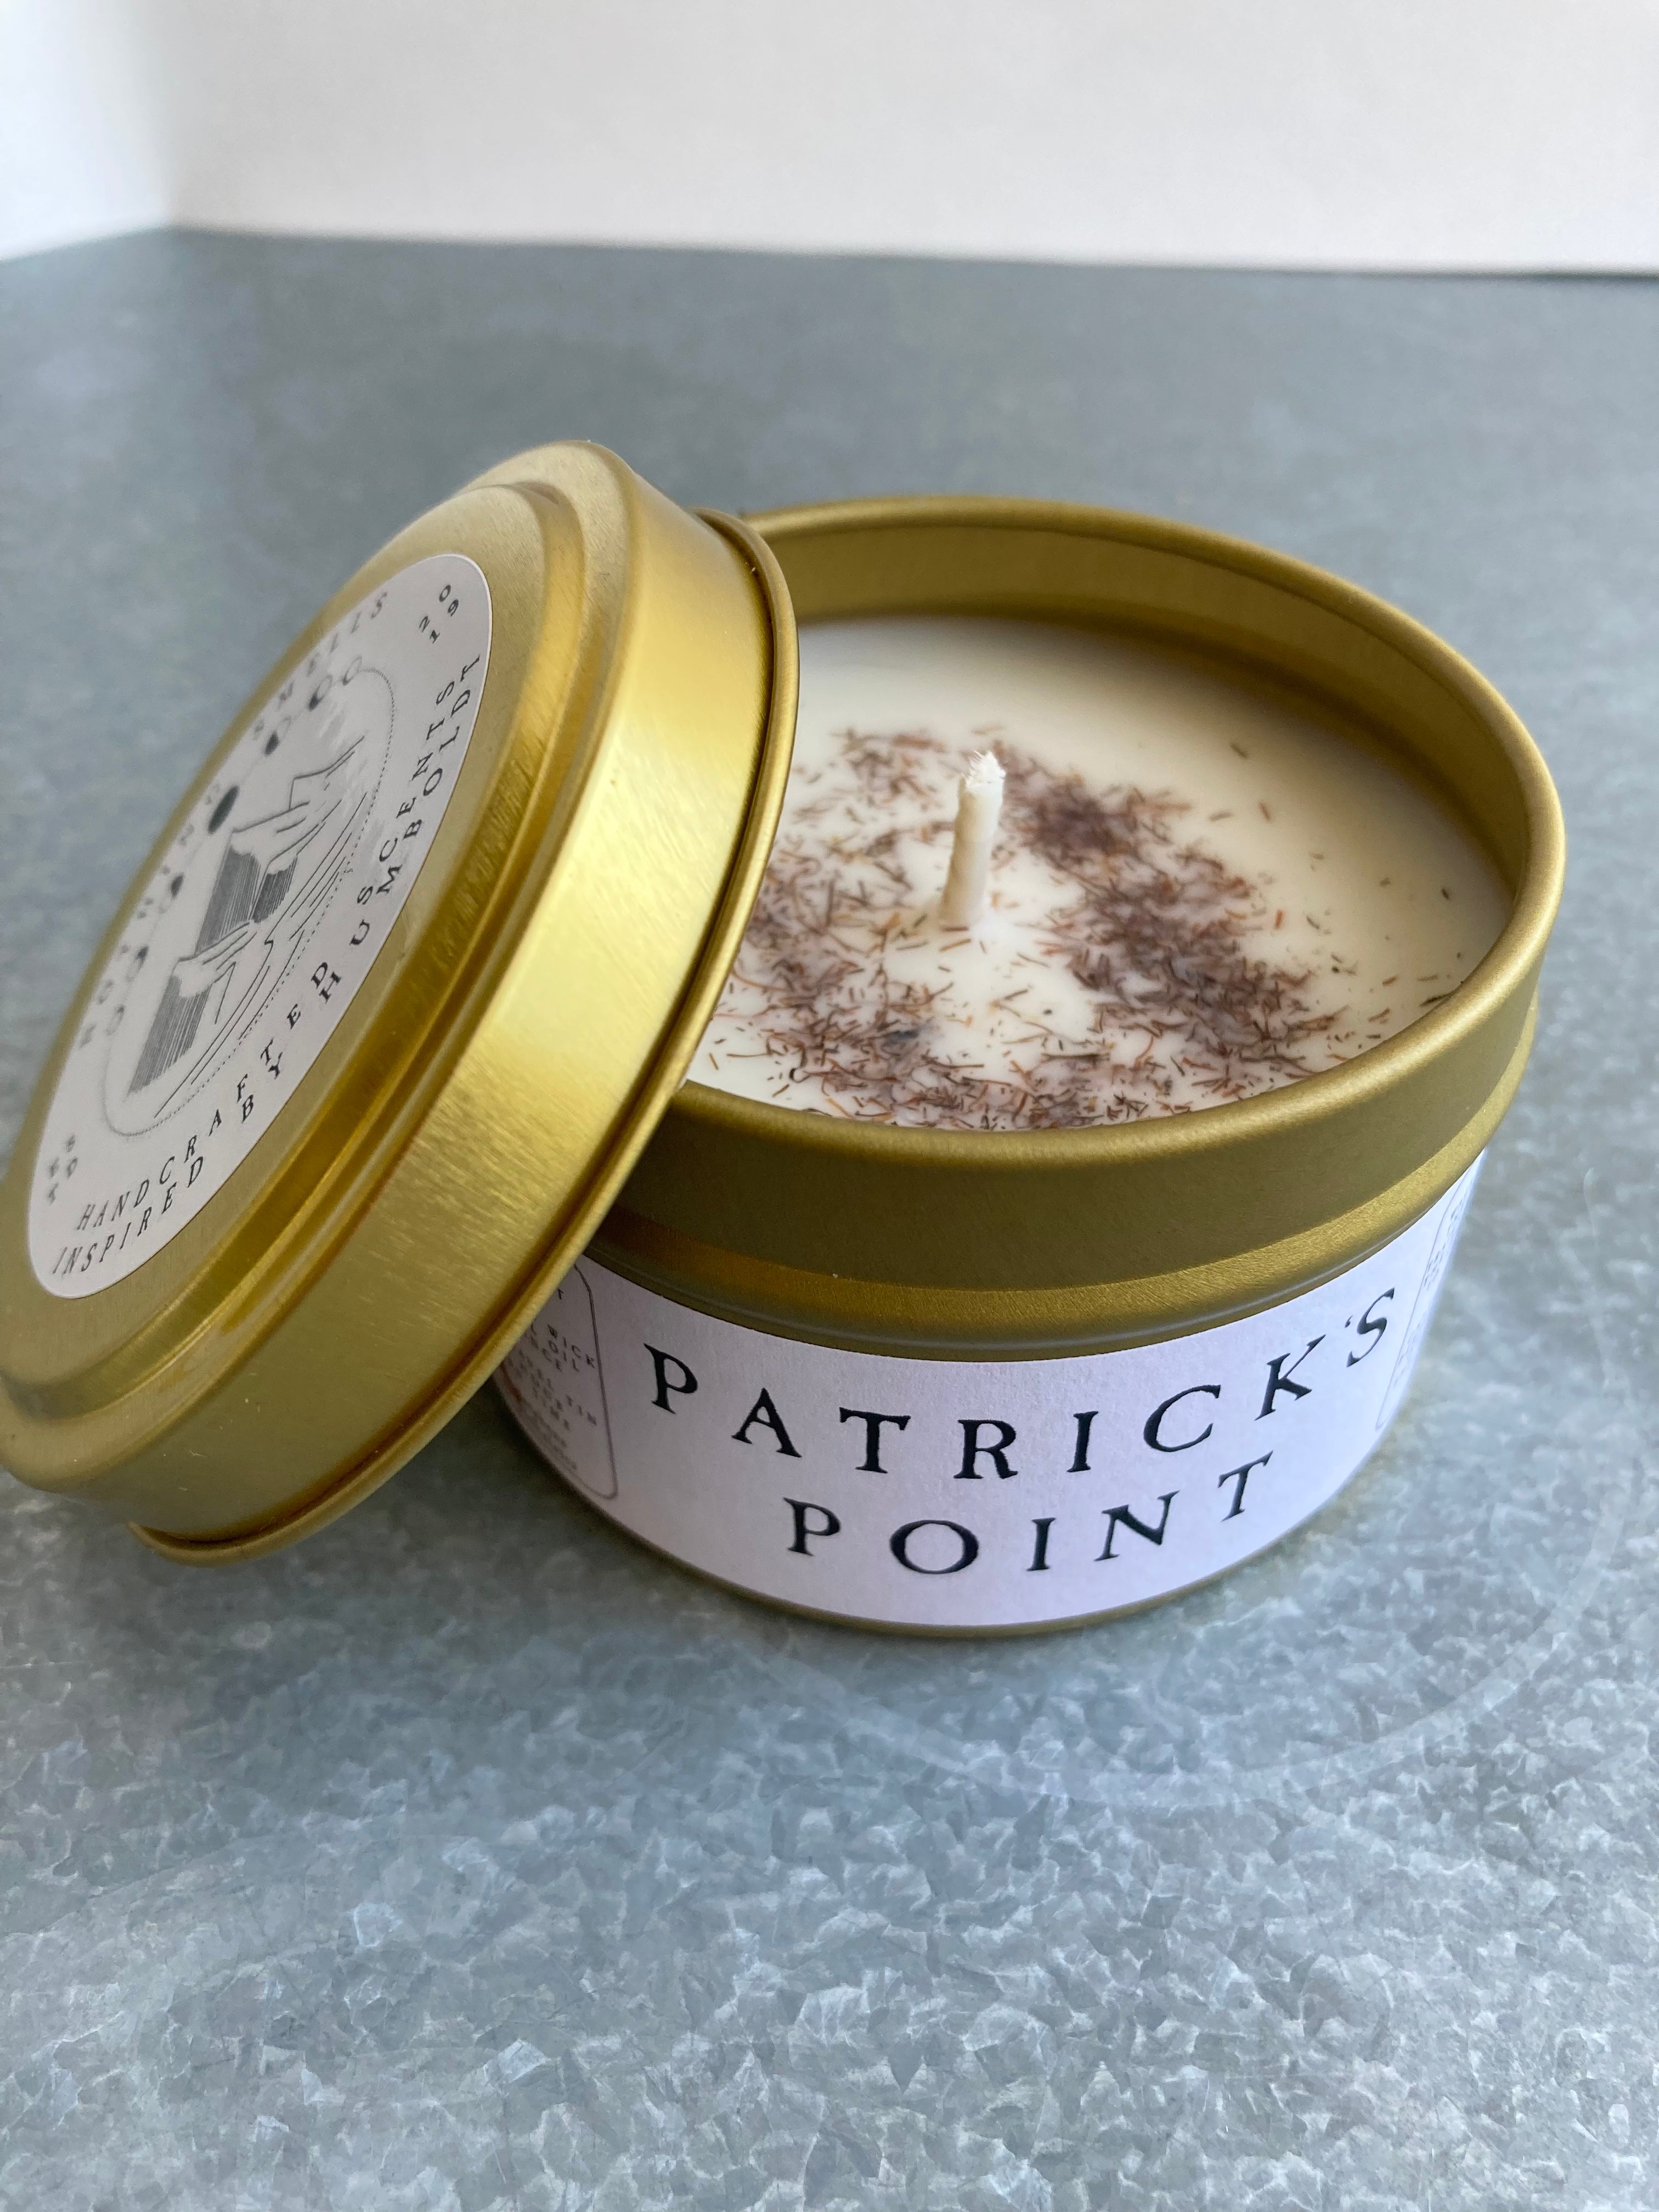 Patrick's Point candle in tin from Nothing Obvious